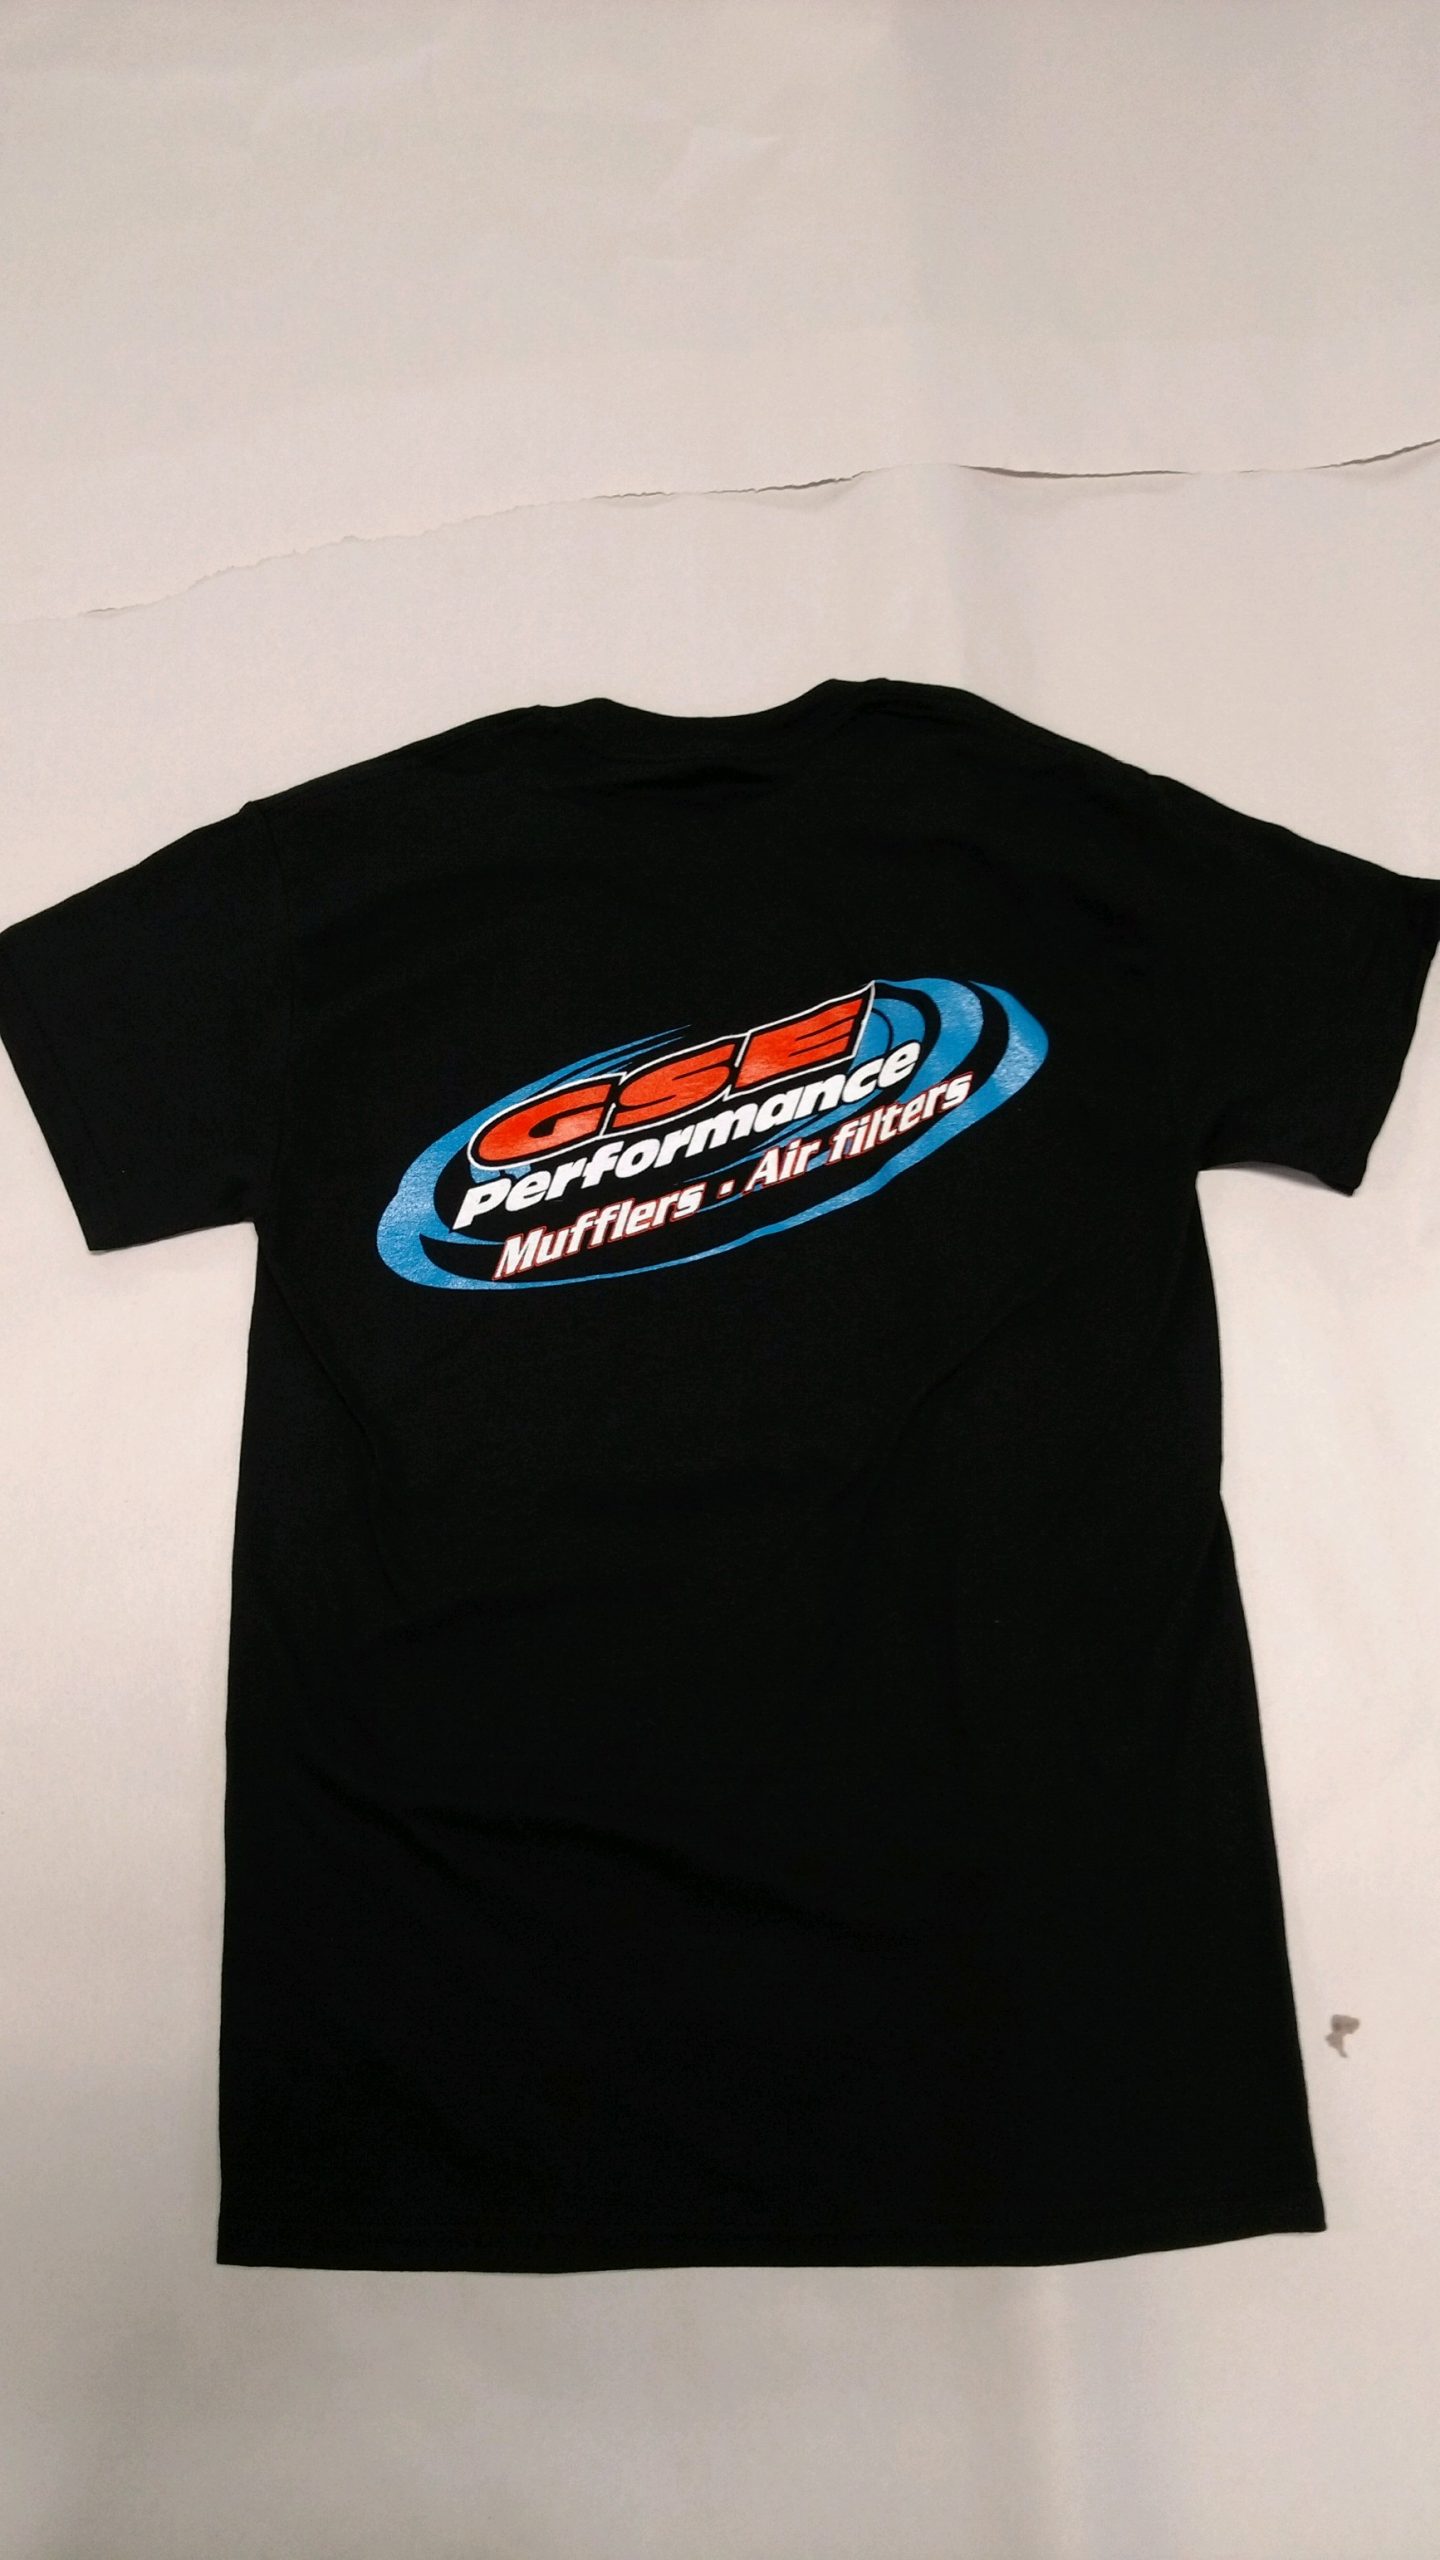 GSE T-SHIRT Large - GSE Performance